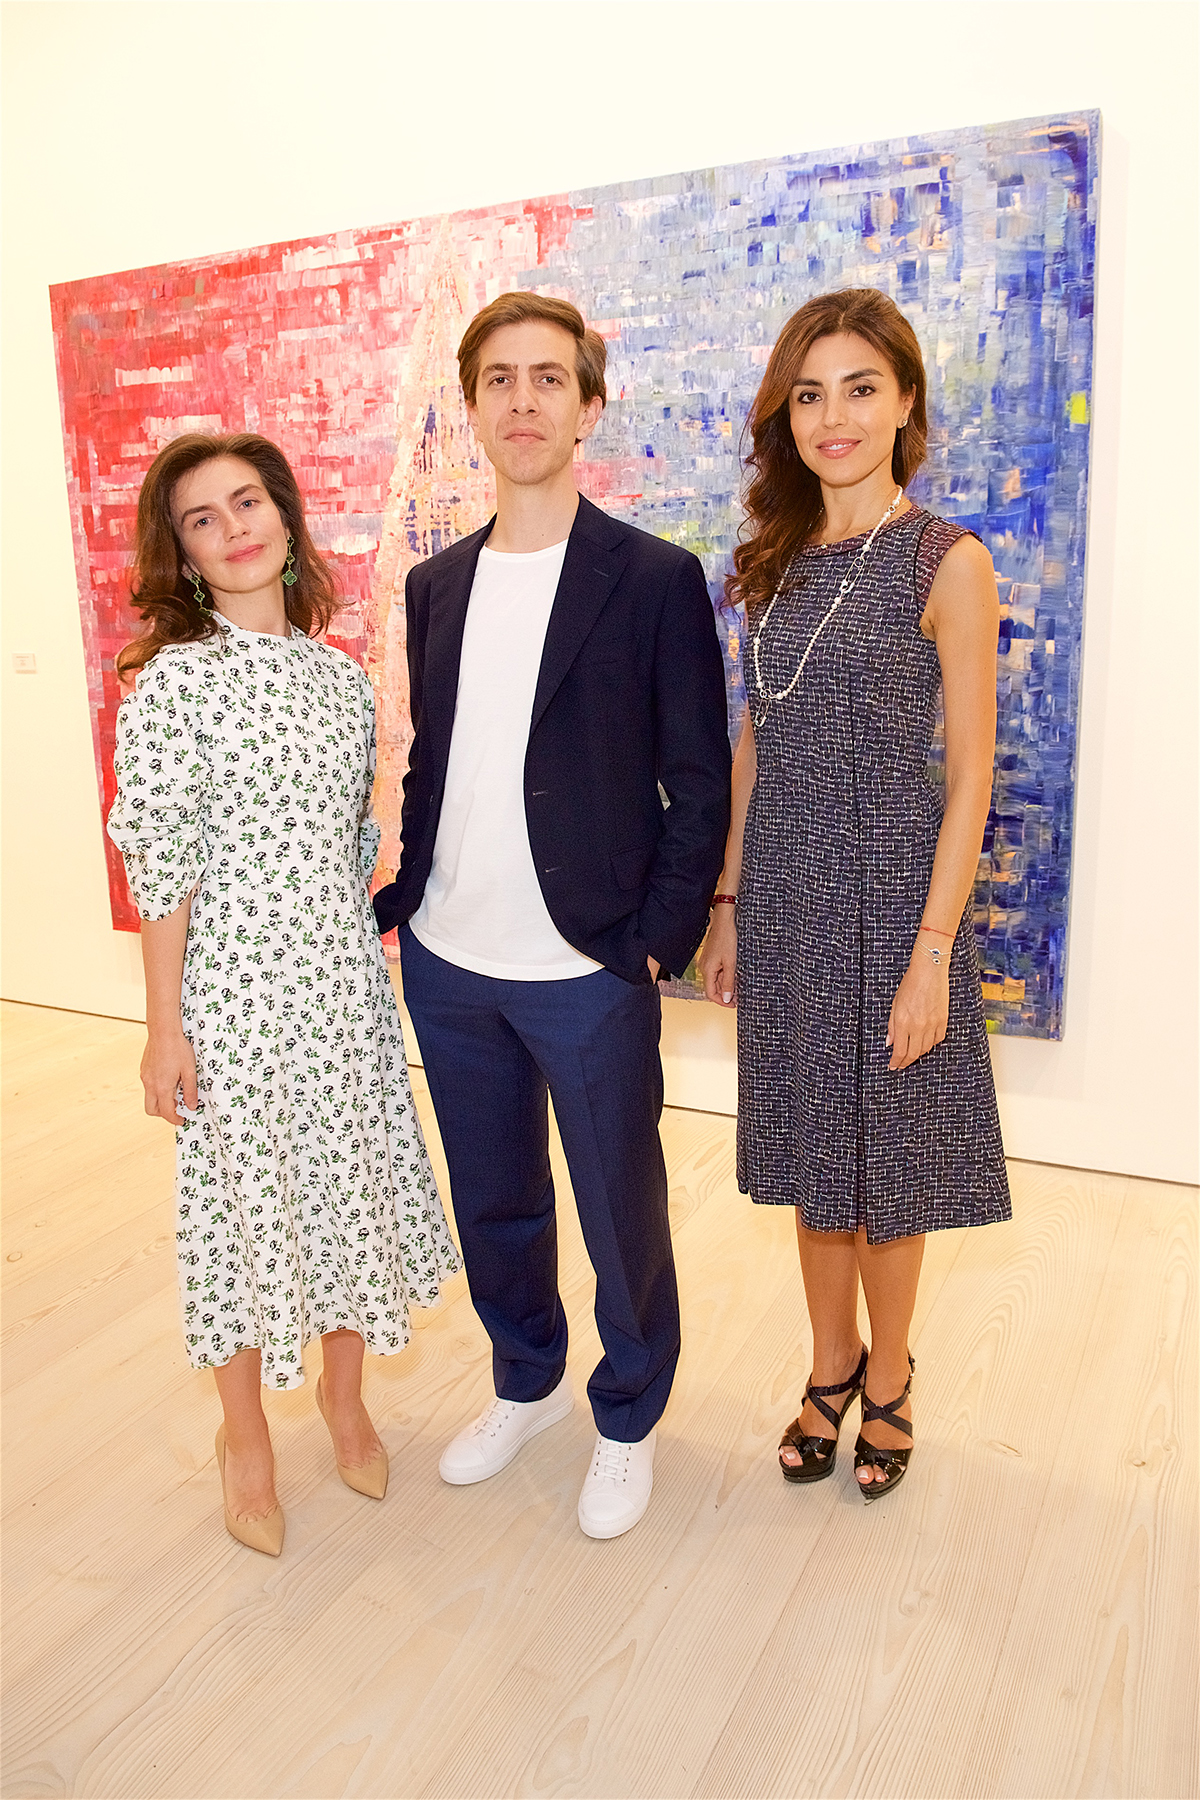 Persian artist Sassan Behnam-Bakhtiar poses in front of his painting with his wife and Nina Moaddel at gallery opening